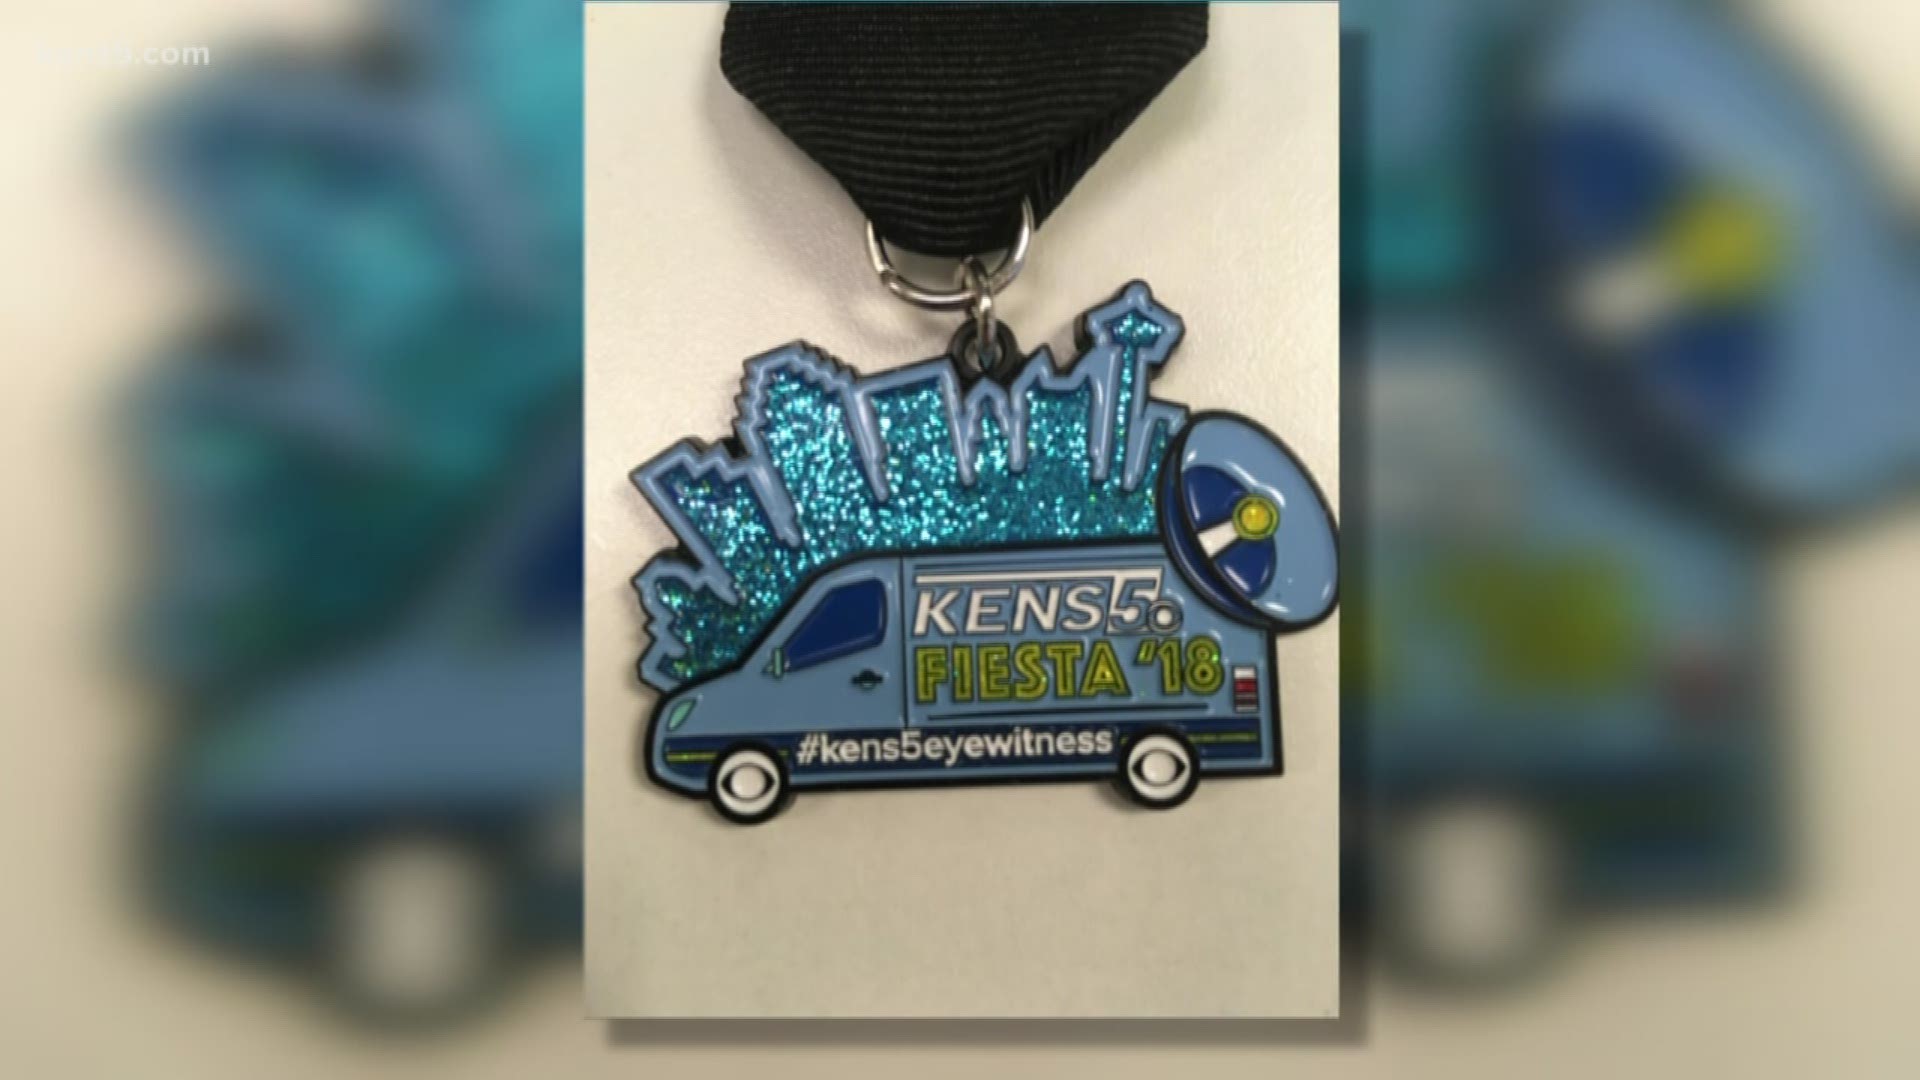 Look out for KENS 5 at Fiesta events to get your hands on one of our medals.